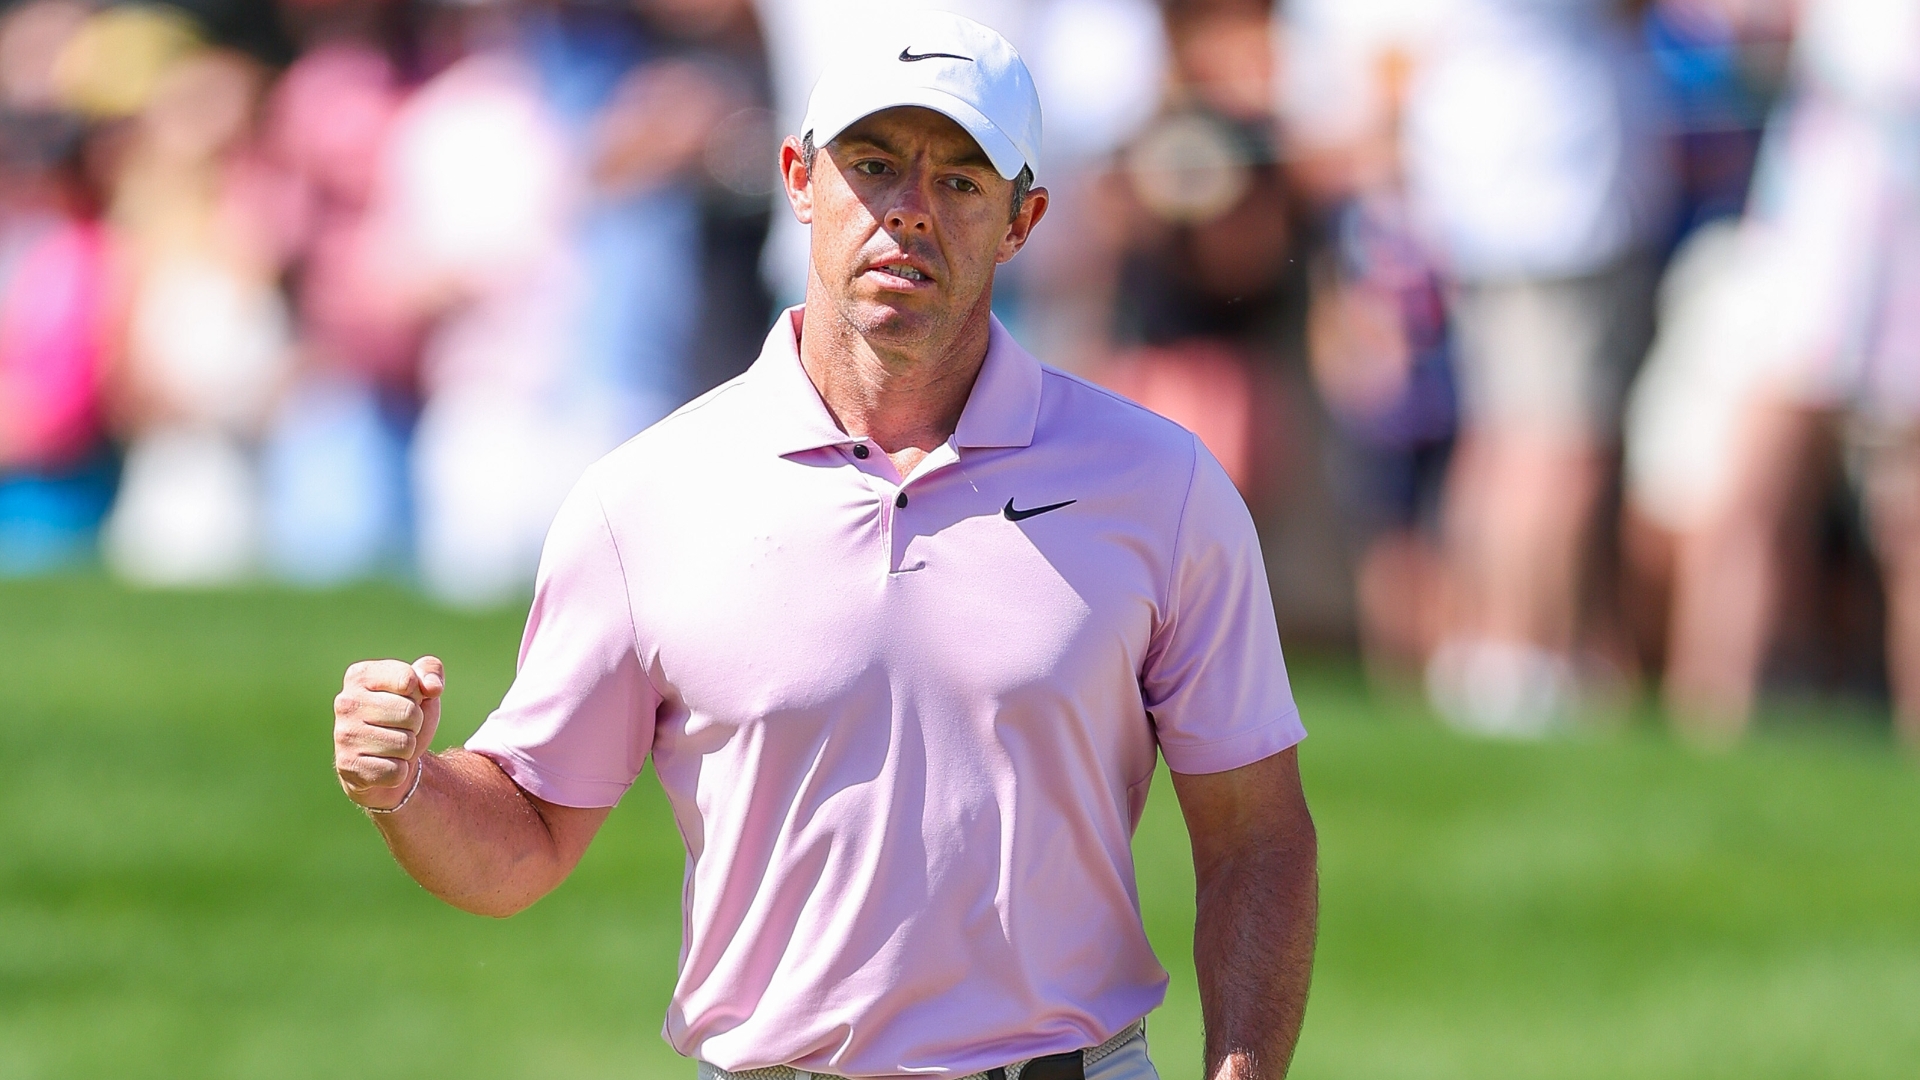 Rory hears his name chanted after taking 3-stroke lead with a birdie